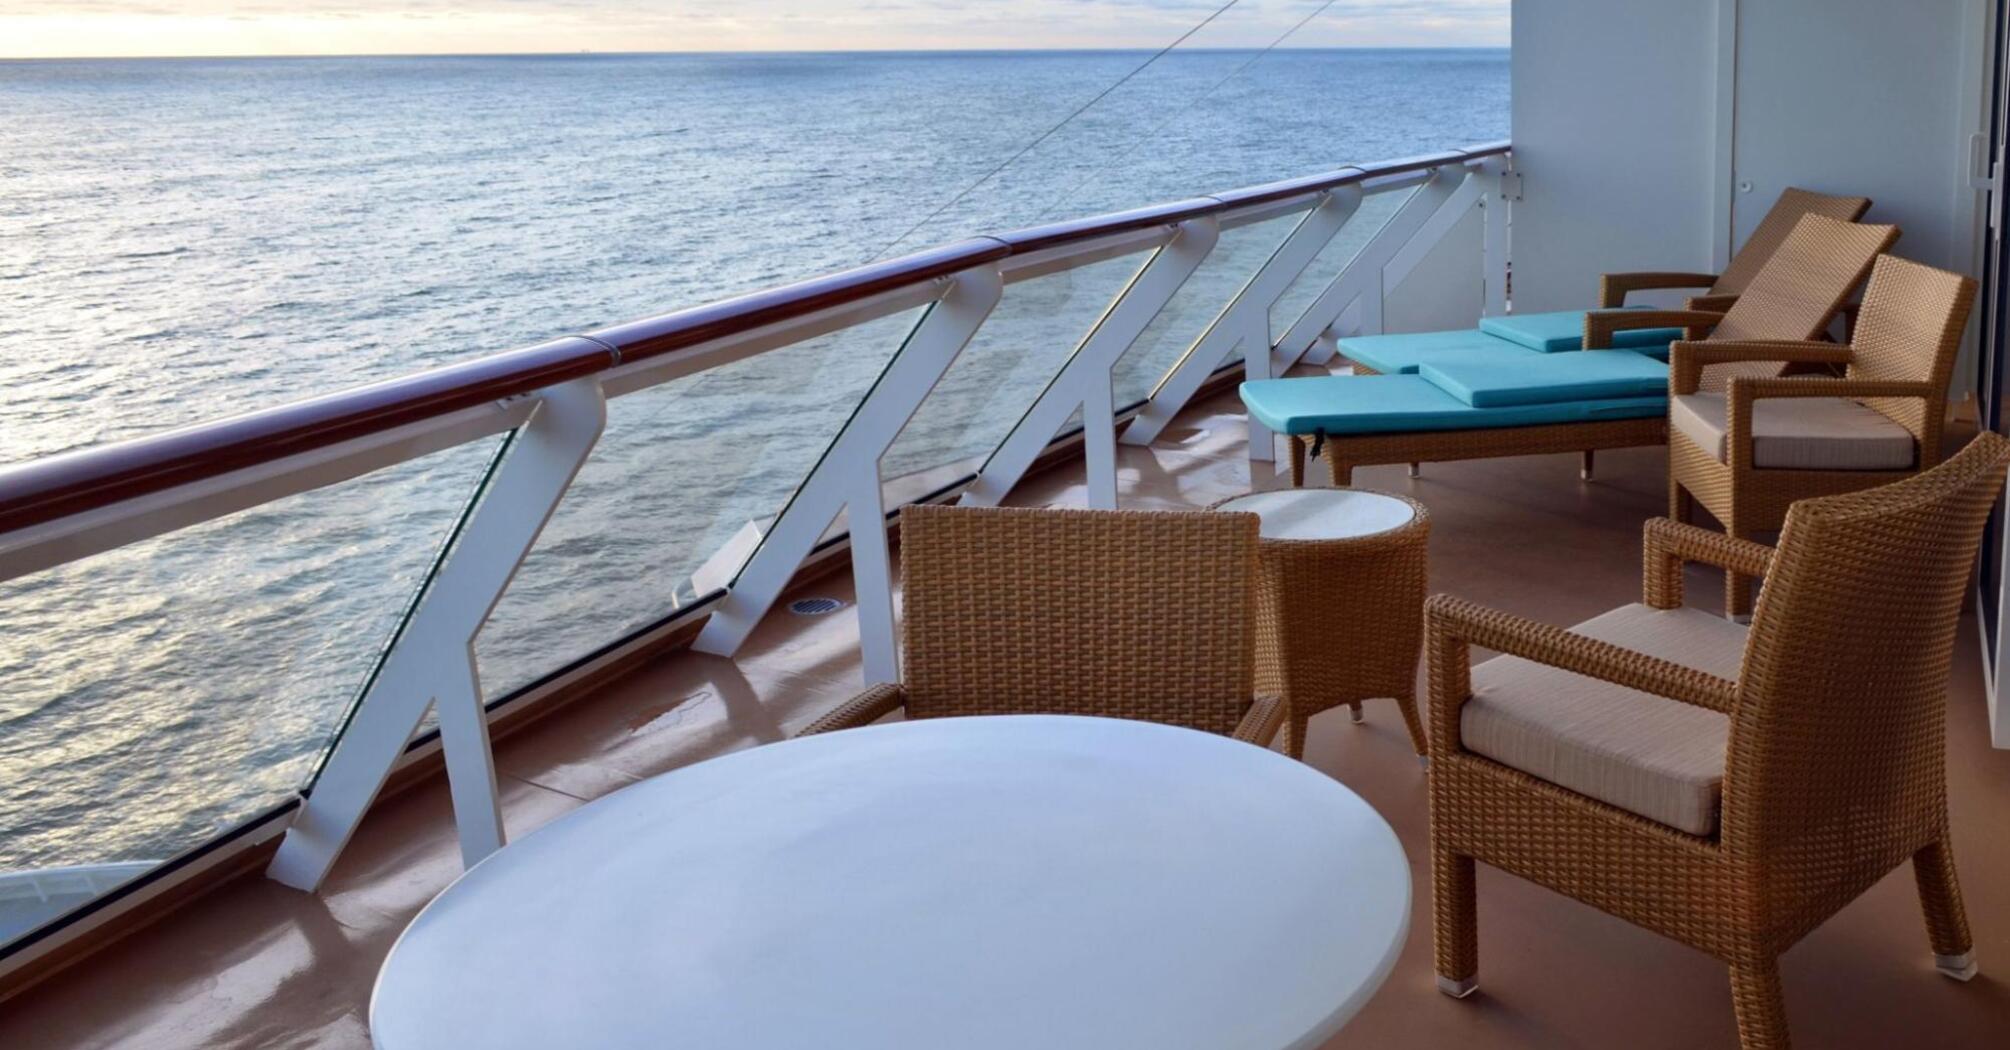 Relaxation area on a cruise ship overlooking the ocean